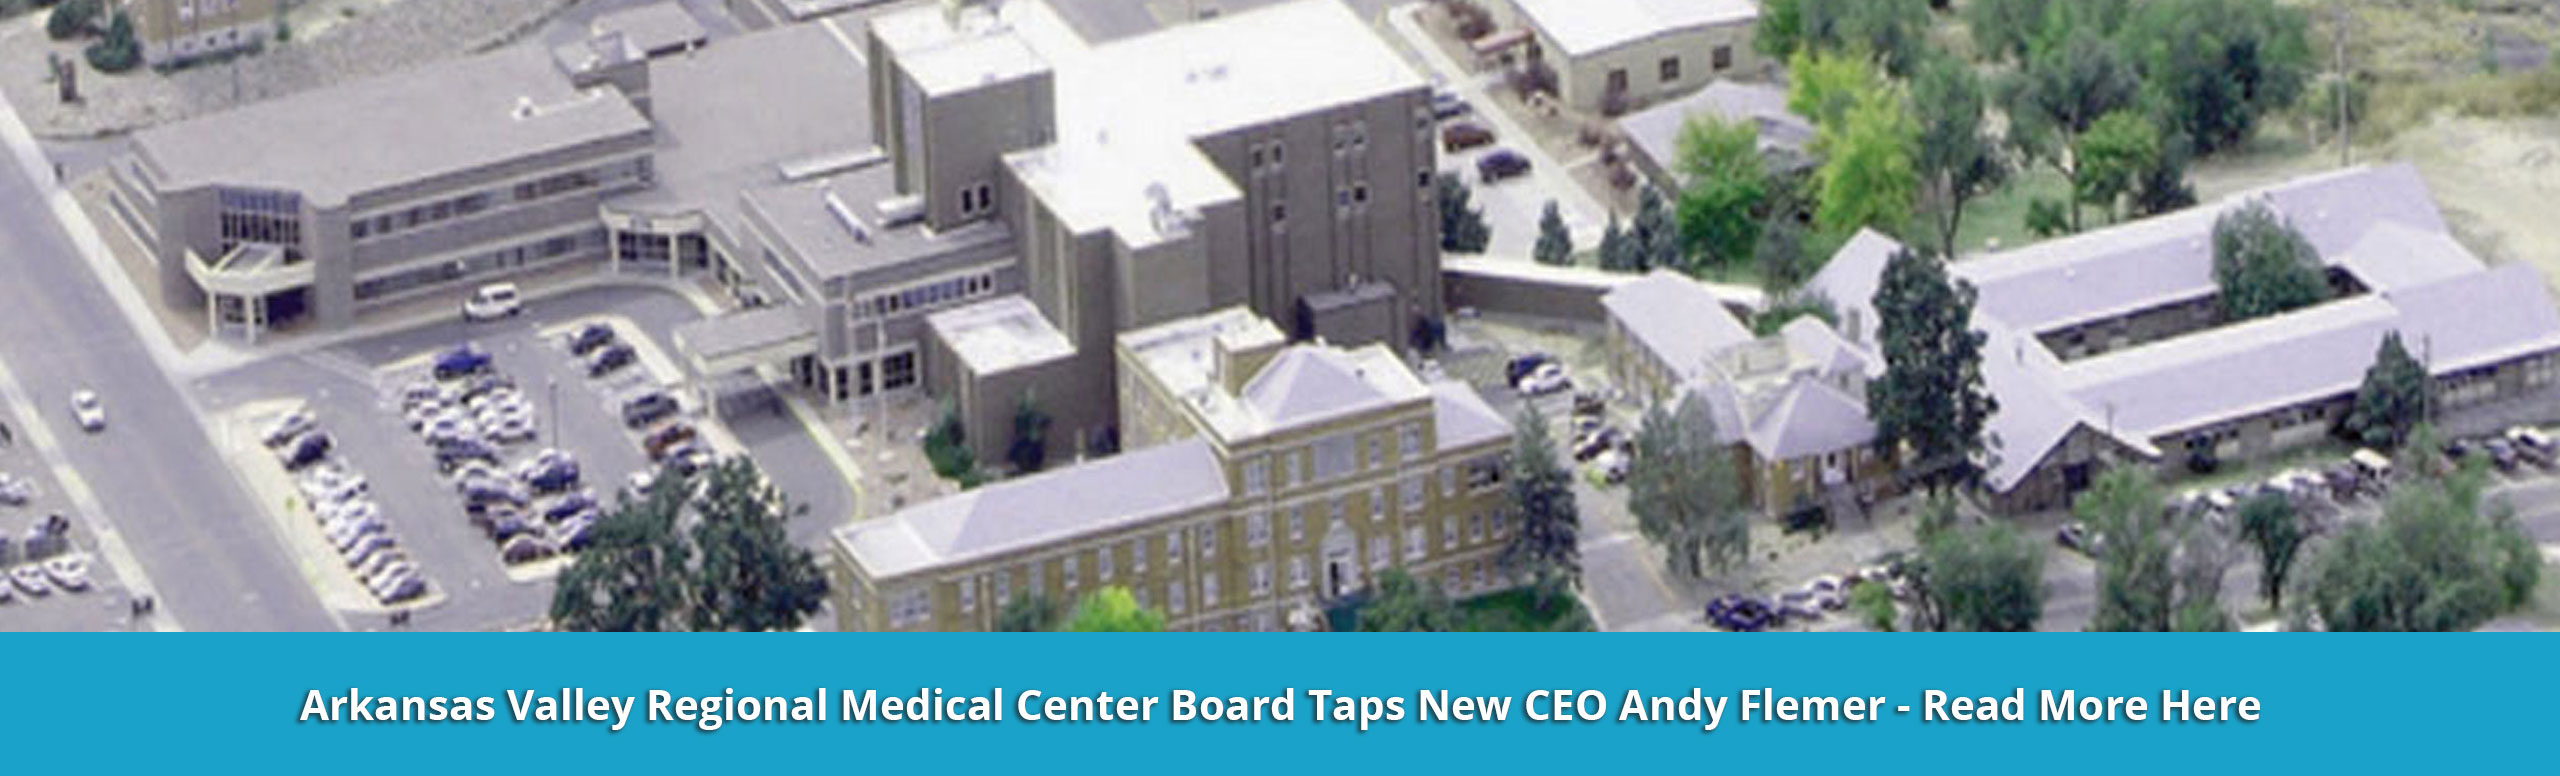 Banner picture of sky shot view of Arkansas Valley Regional Medical Center. Banner says:

Arkansas Valley Regional Medical Center Board Taps New CEO Andy Flemer- Read More Here